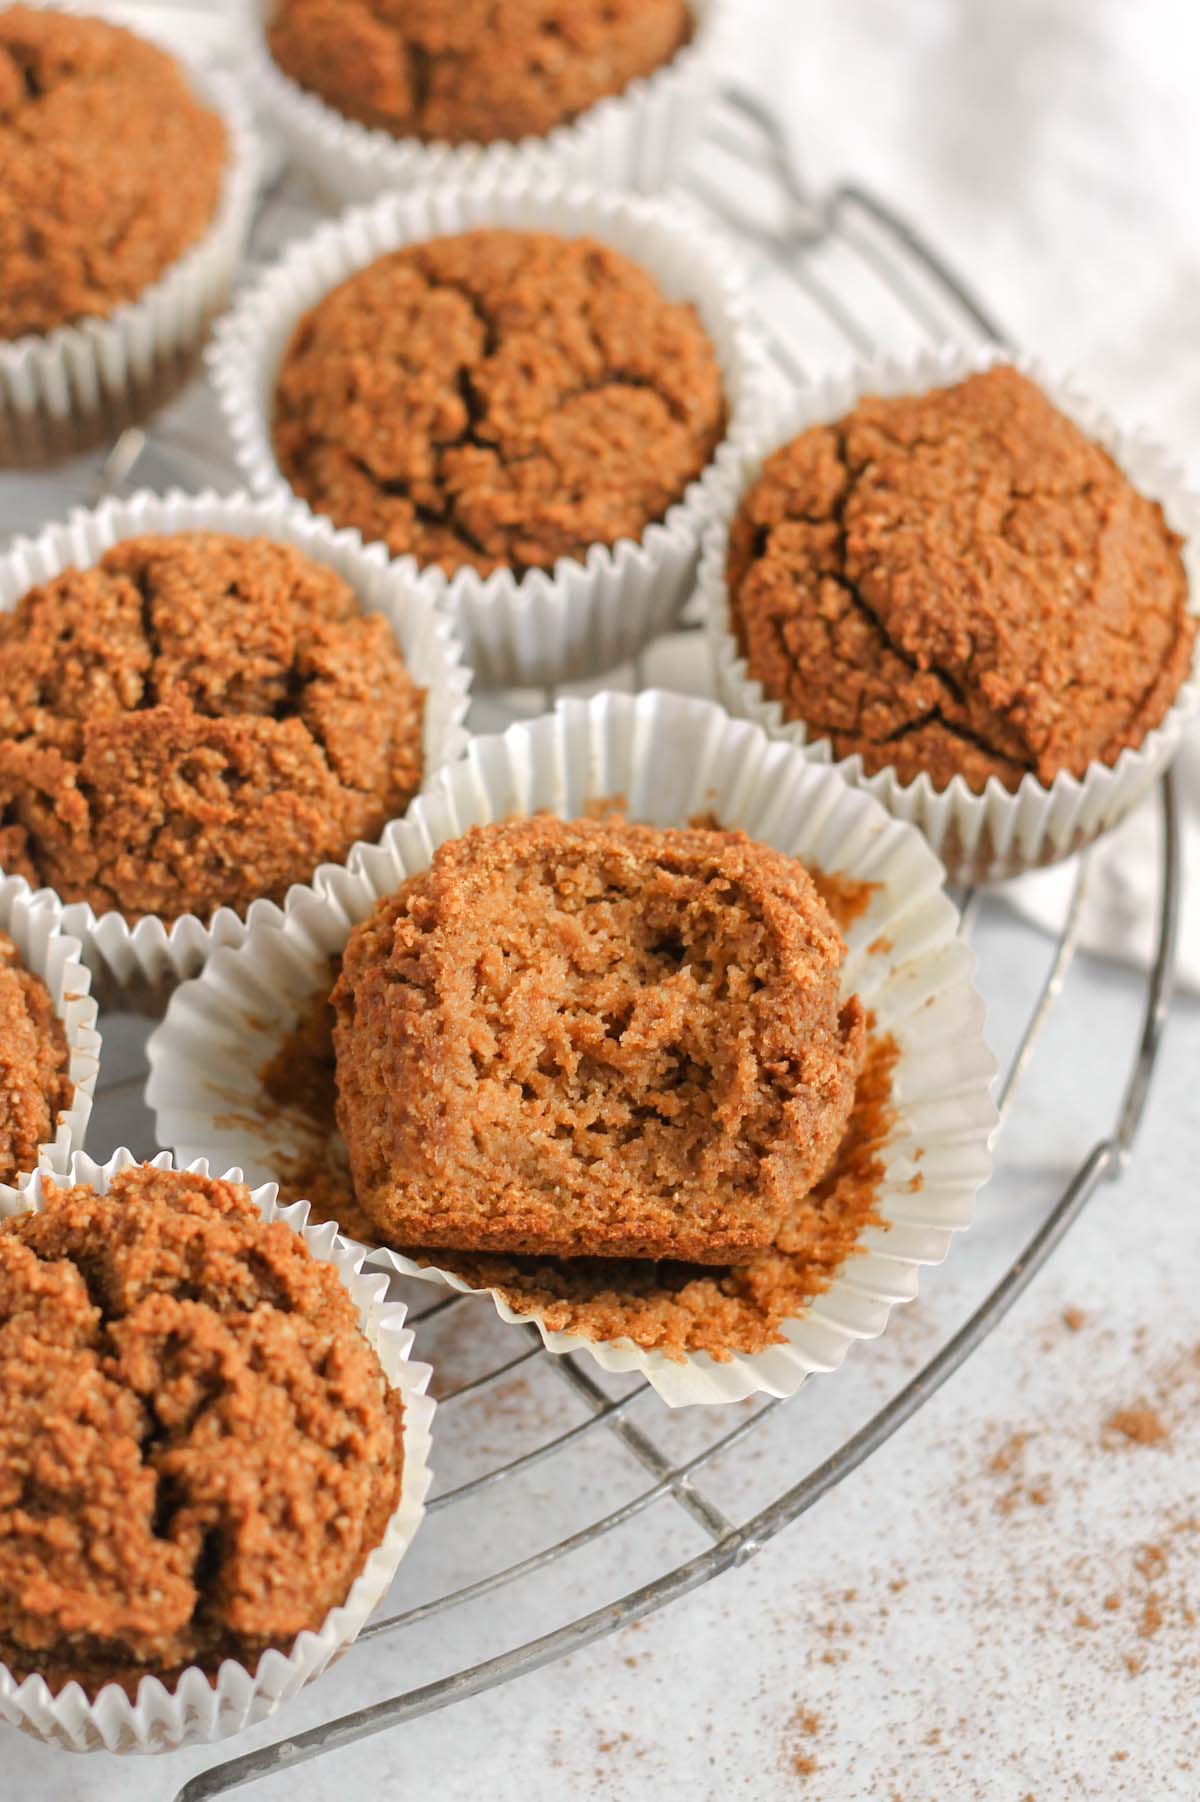 Paleo pumpkin muffins on a round wire cooling rack with a bite taken out of the center muffin laying in a white paper muffin liner.